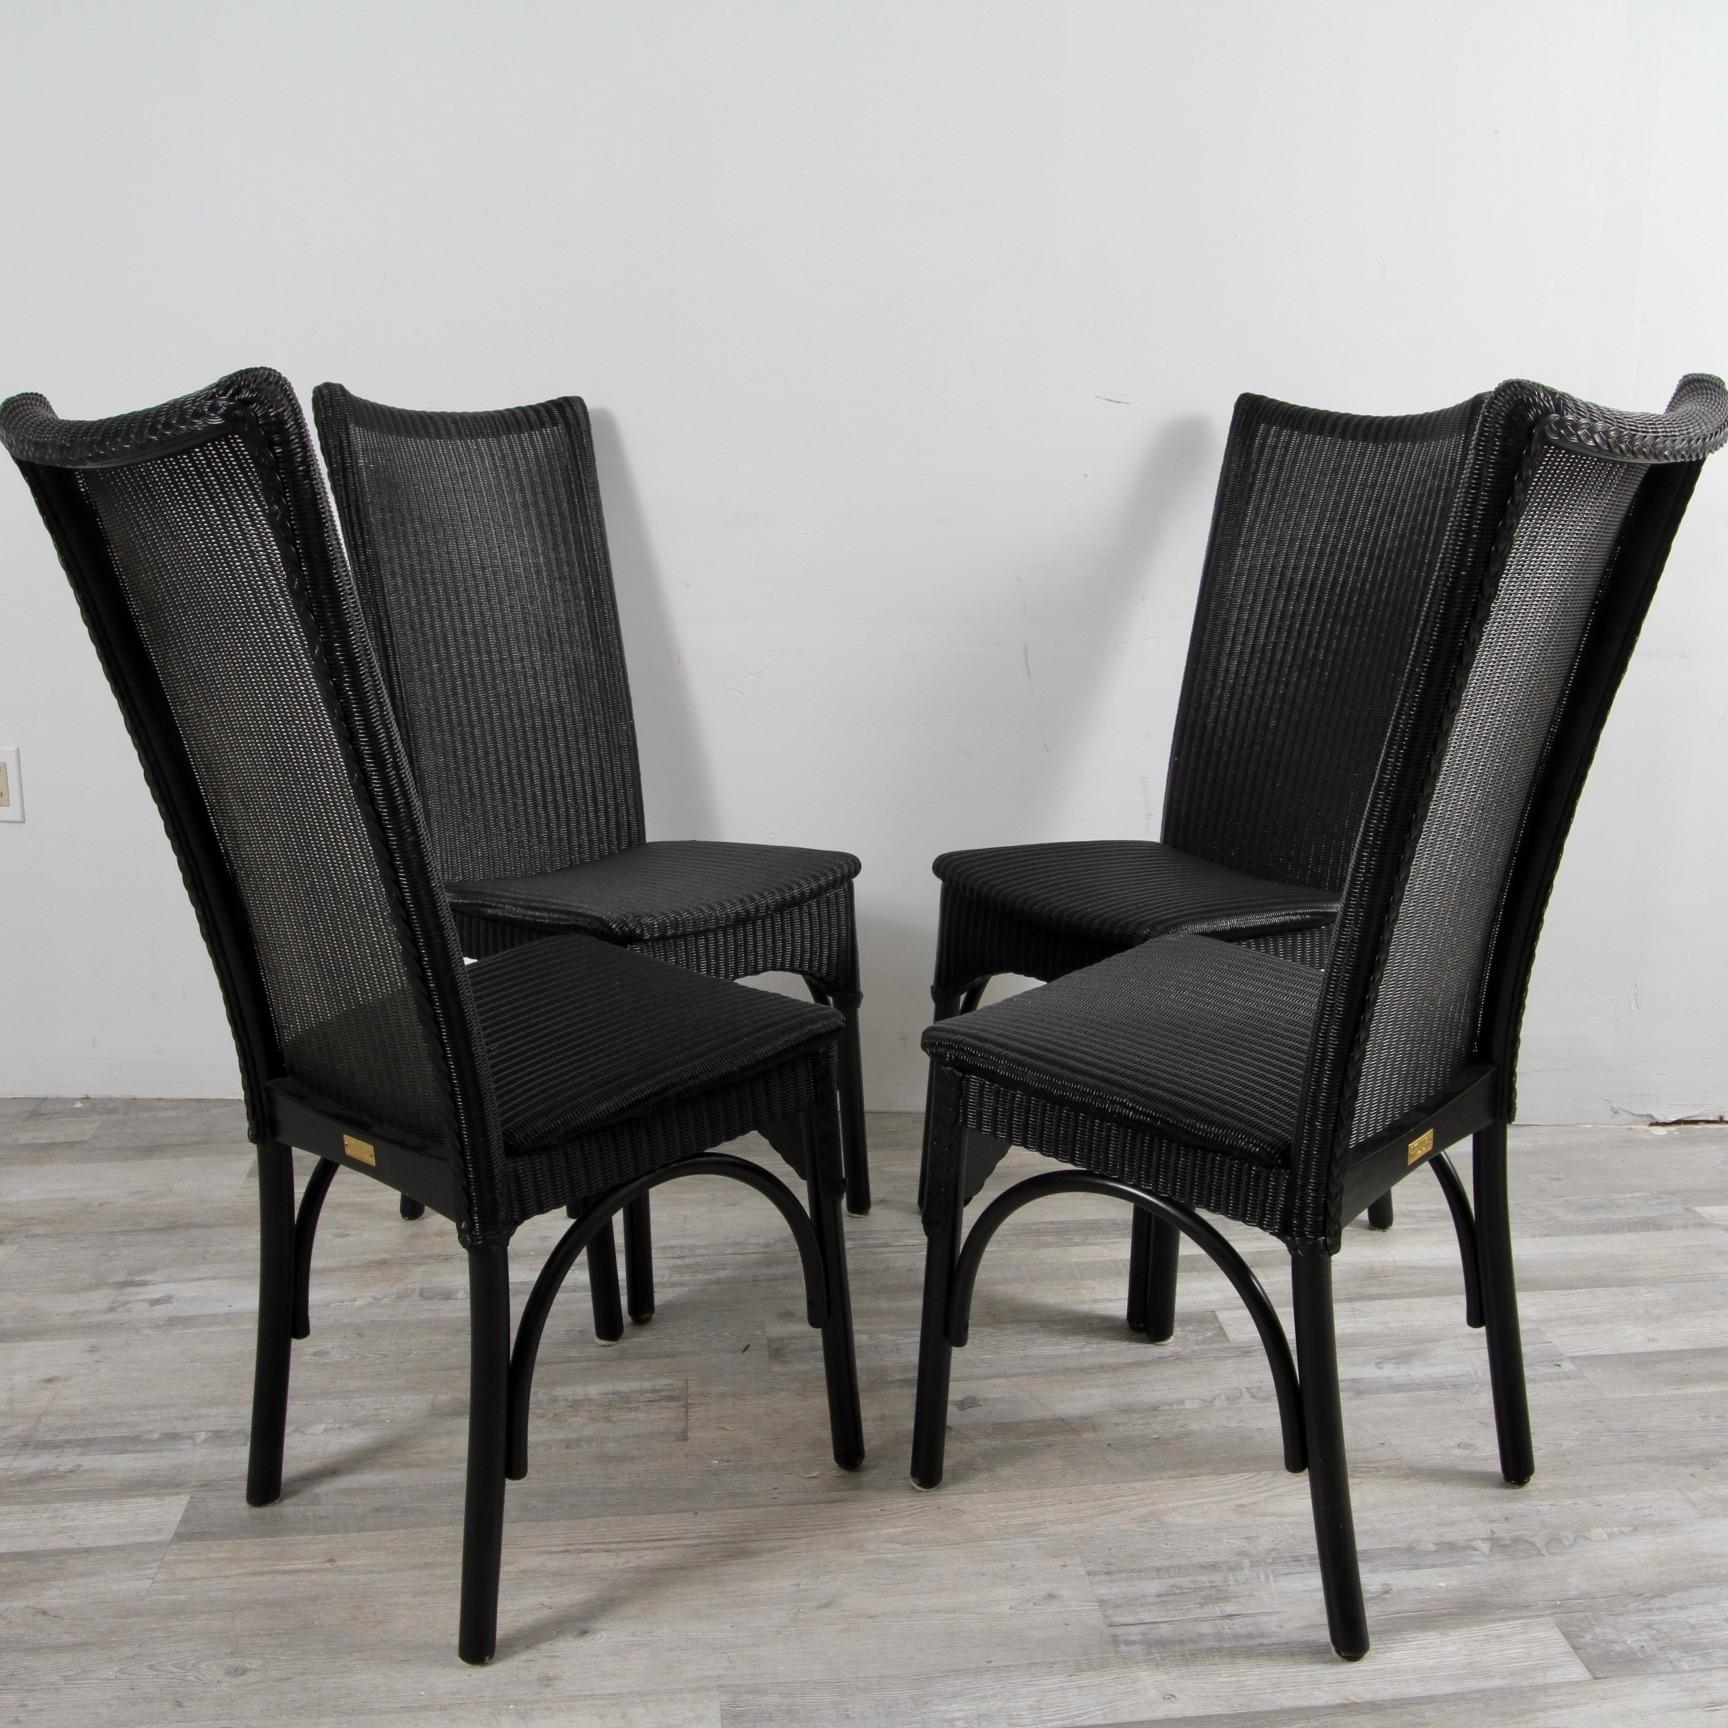 Clean set of 4 Loom Italia ebony wicker dining chairs. 

Lloyd Loom was invented by an American, Marshall Burns Lloyd, in 1917. He came up with an idea for an innovative woven material that would offer the benefits of wicker and rattan, without